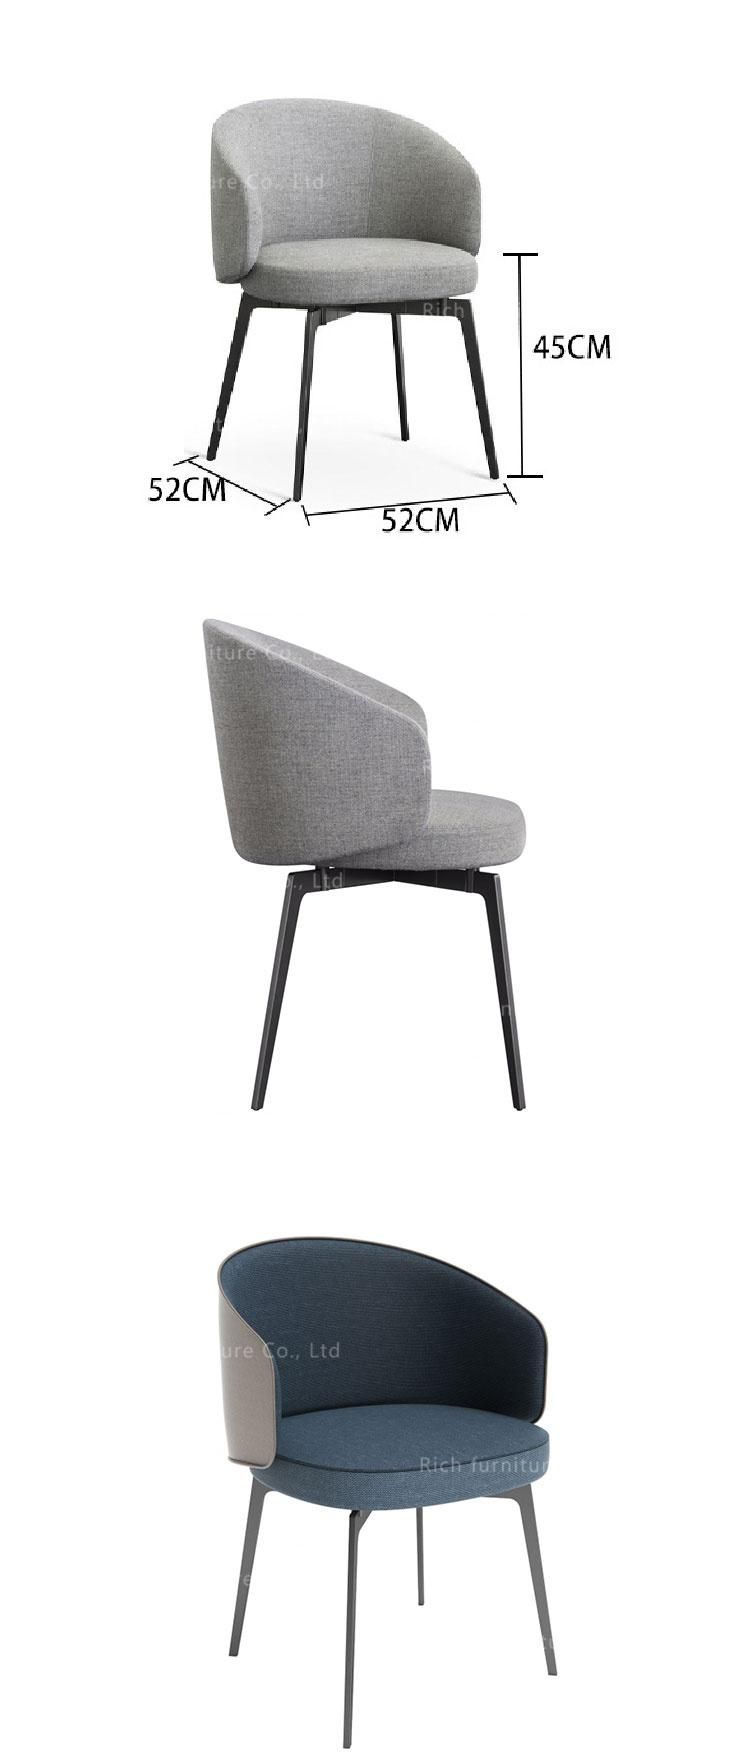 Metal Black Legs Upholstered Dining Chair Modern Grey Fabric Leisure Dining Chair